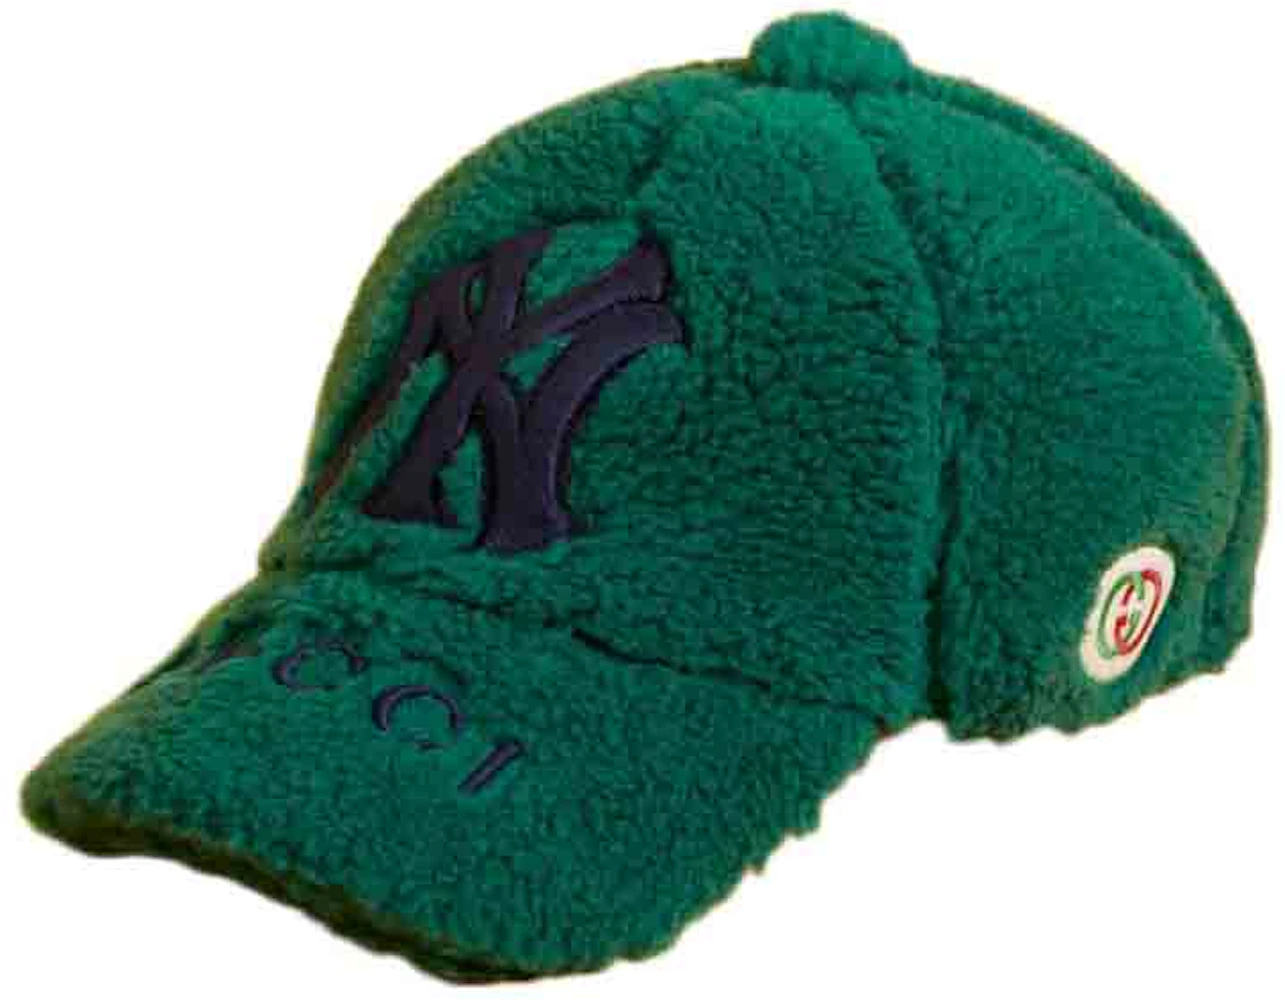 Gucci x MLB 2022 Shearling Baseball Hat with Yankees Patch Green - SS22 - US